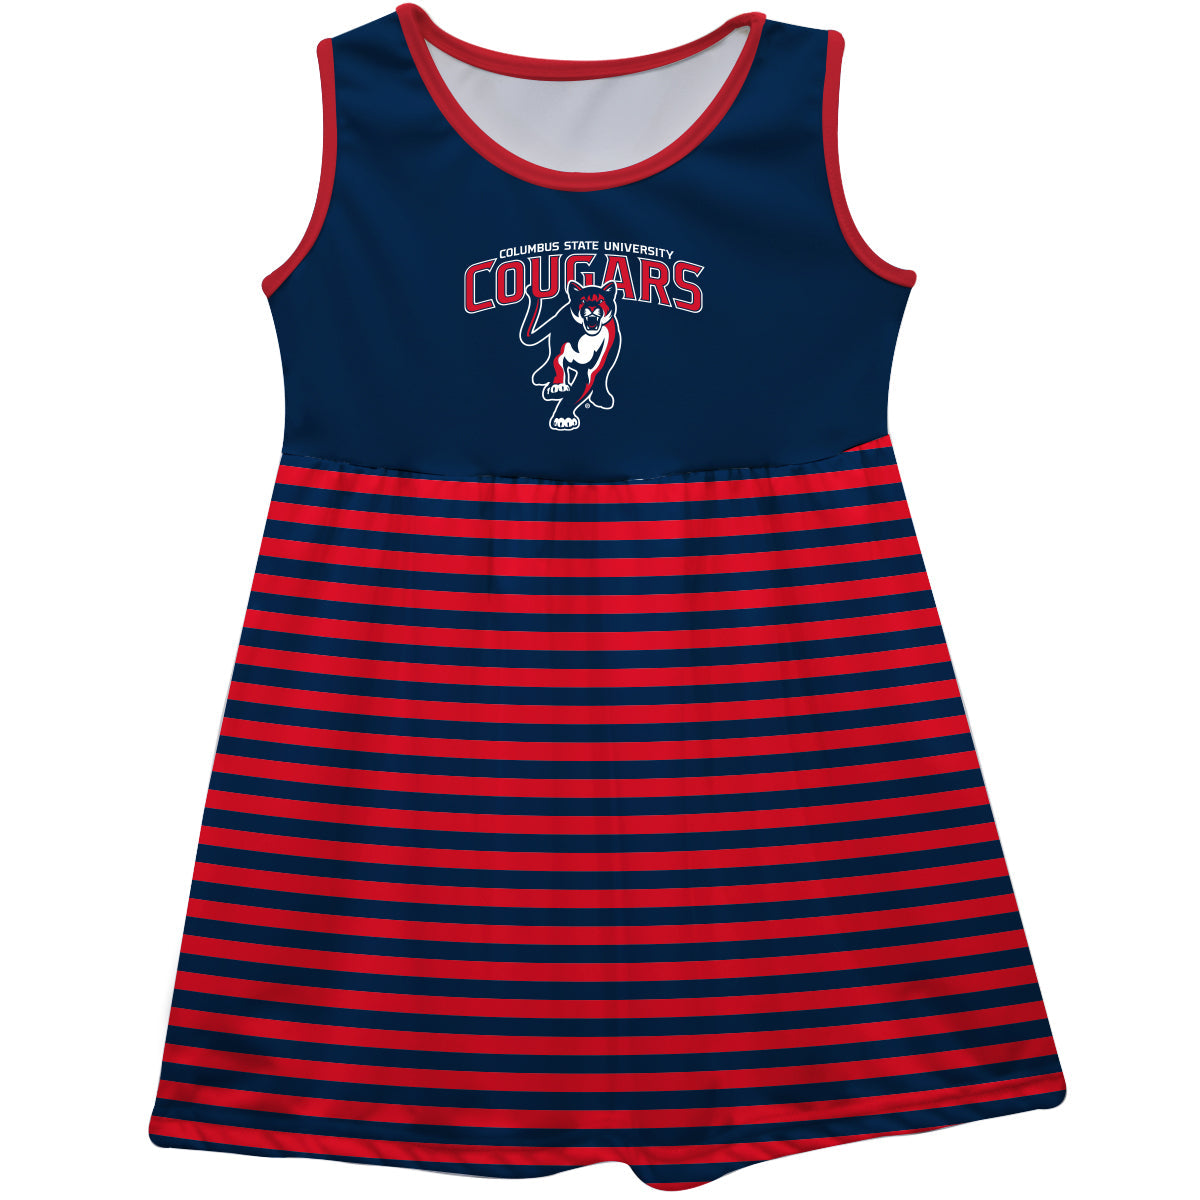 Columbus State Cougars Girls Game Day Sleeveless Tank Dress Solid Navy Logo Stripes on Skirt by Vive La Fete-Campus-Wardrobe